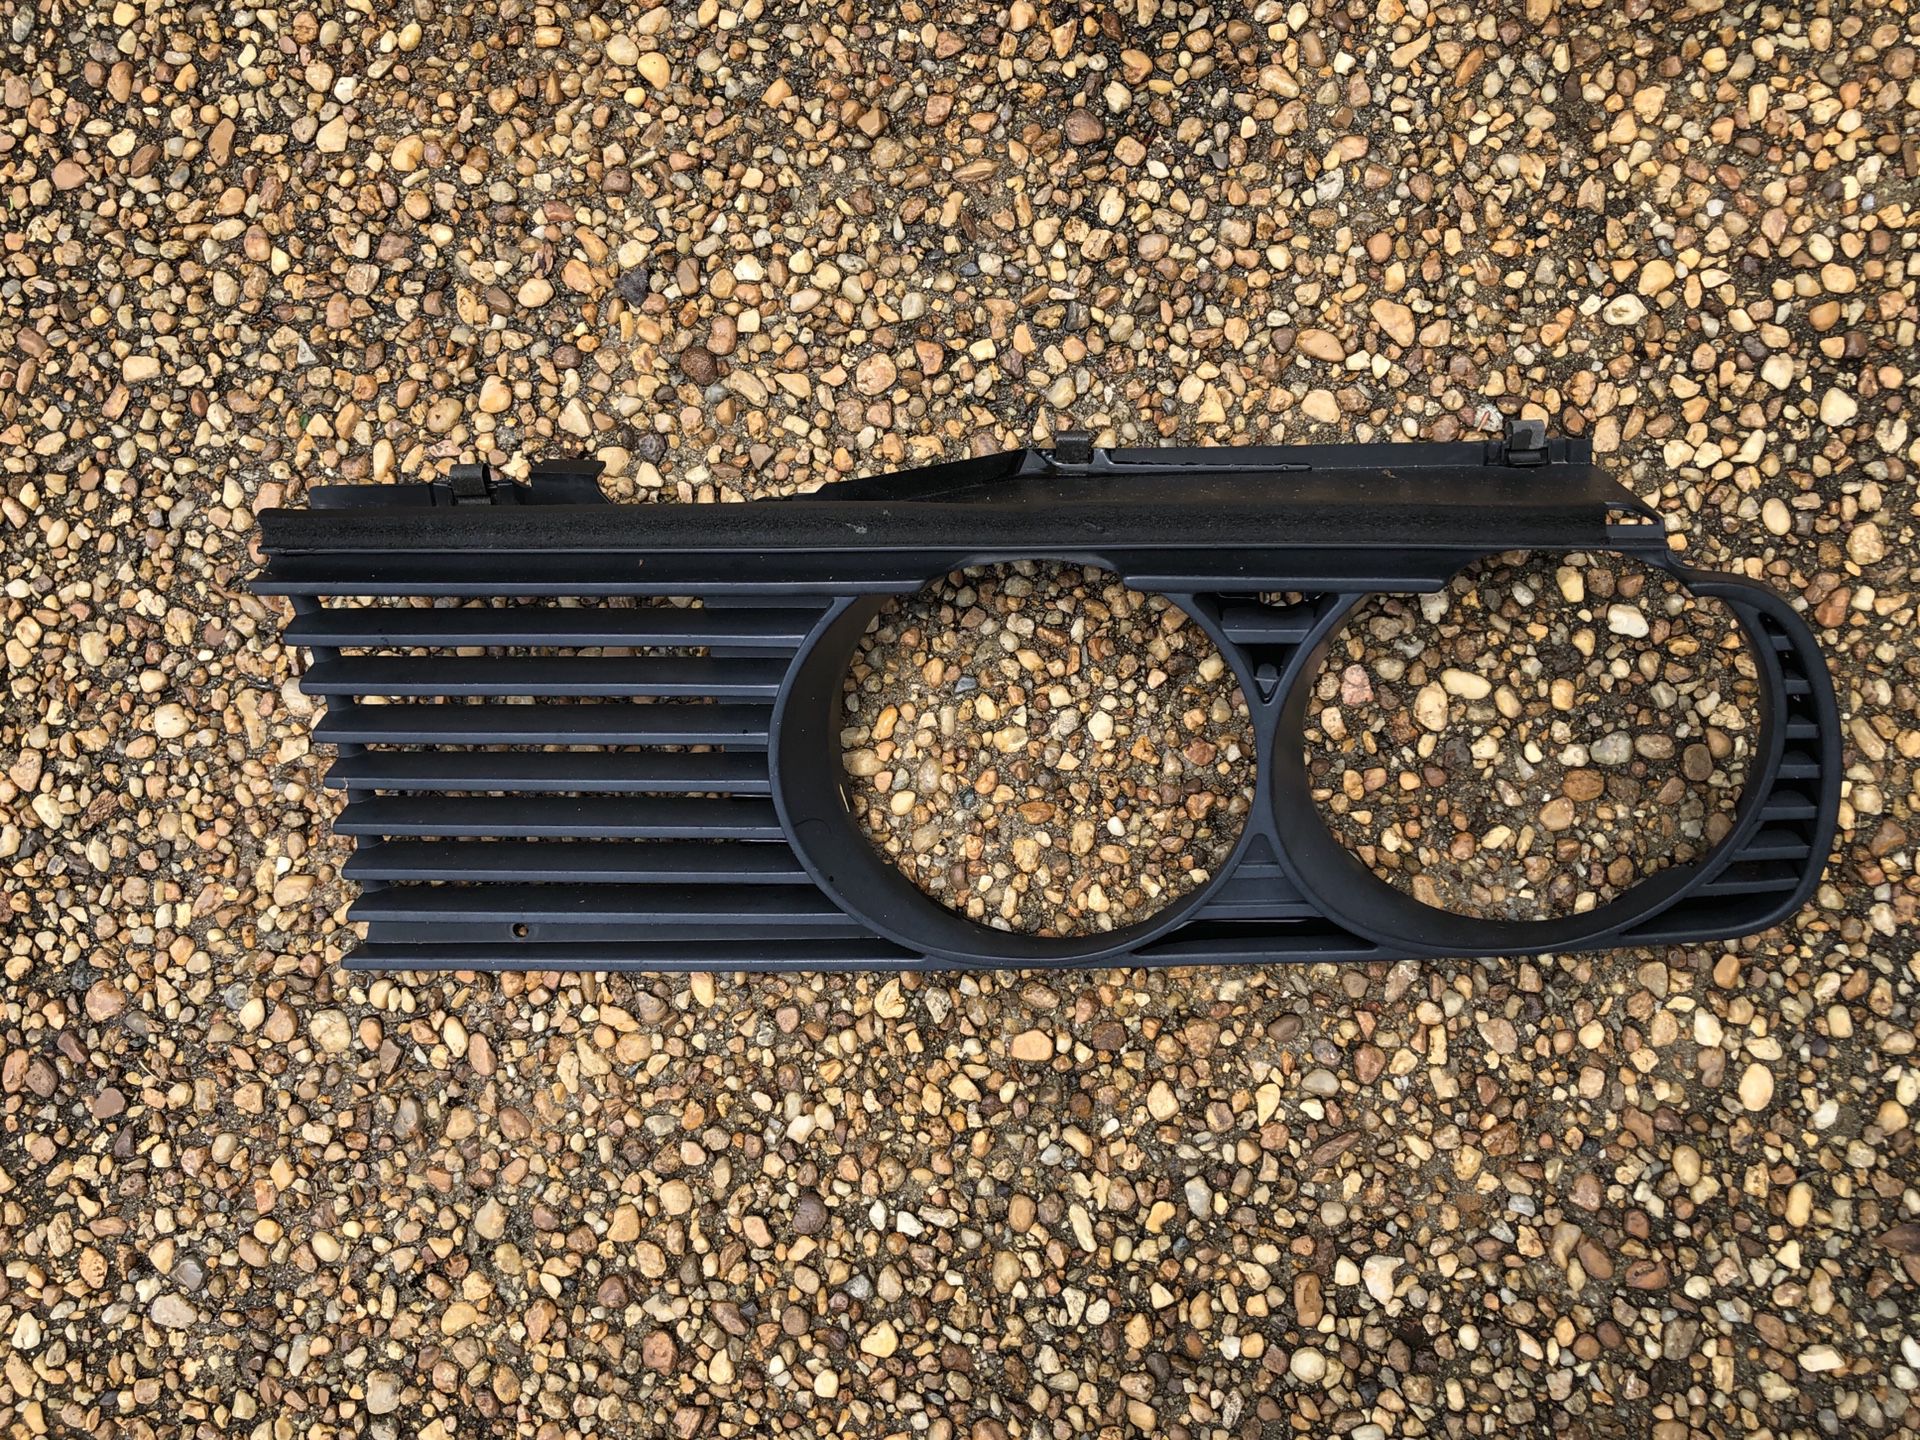 BMW e30 front headlight grille